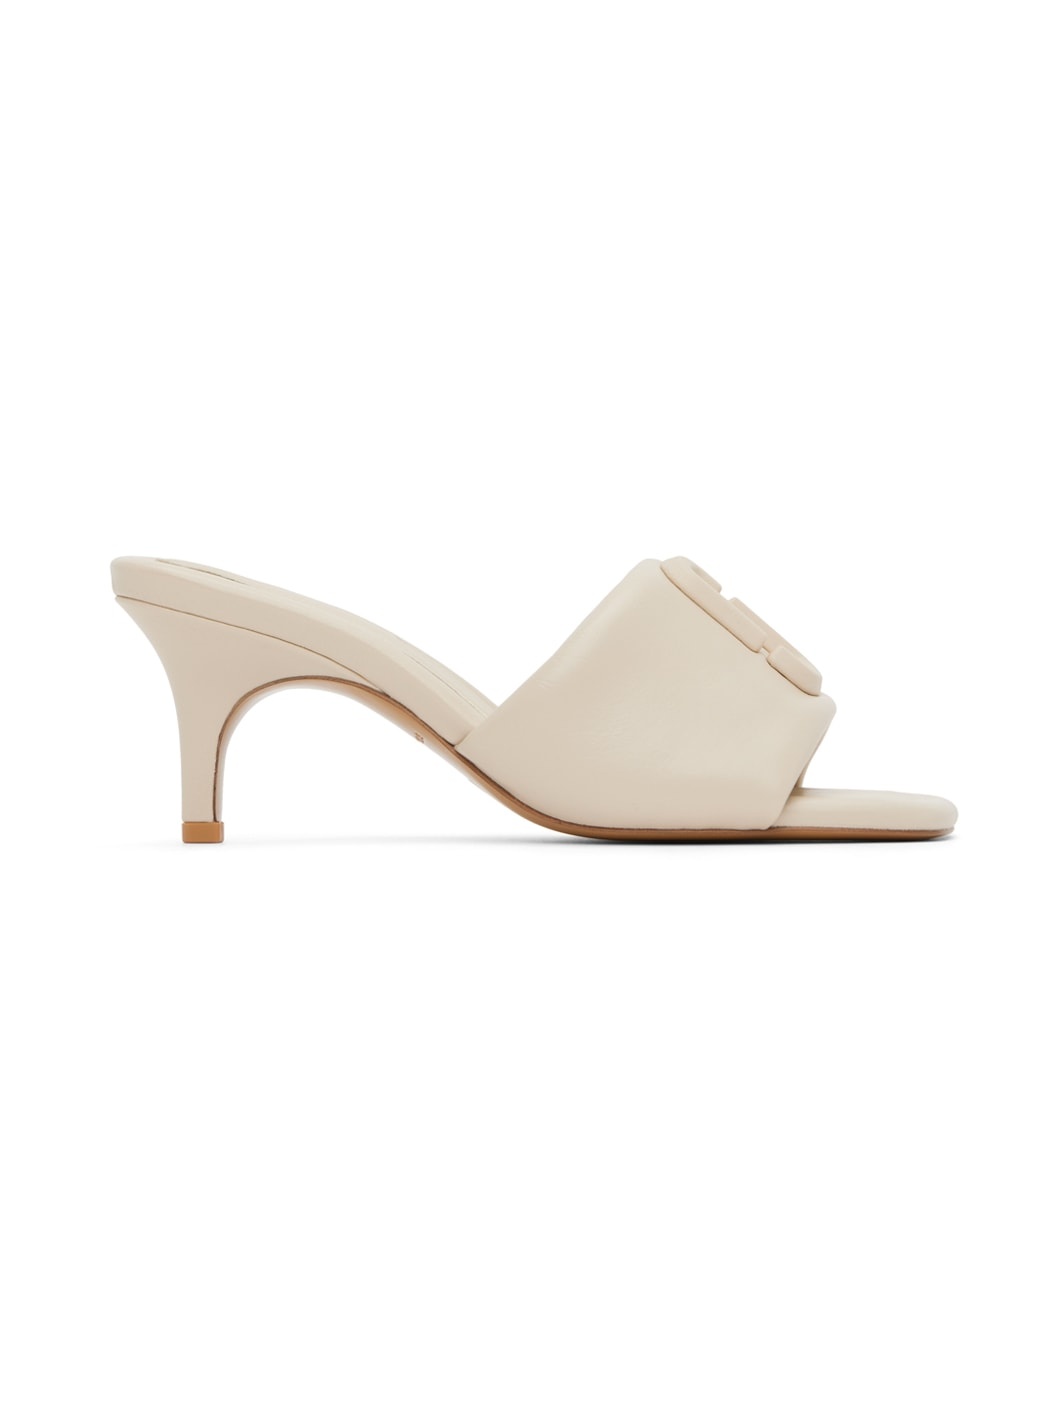 Off-White 'The Leather J Marc' Heeled Sandals - 1